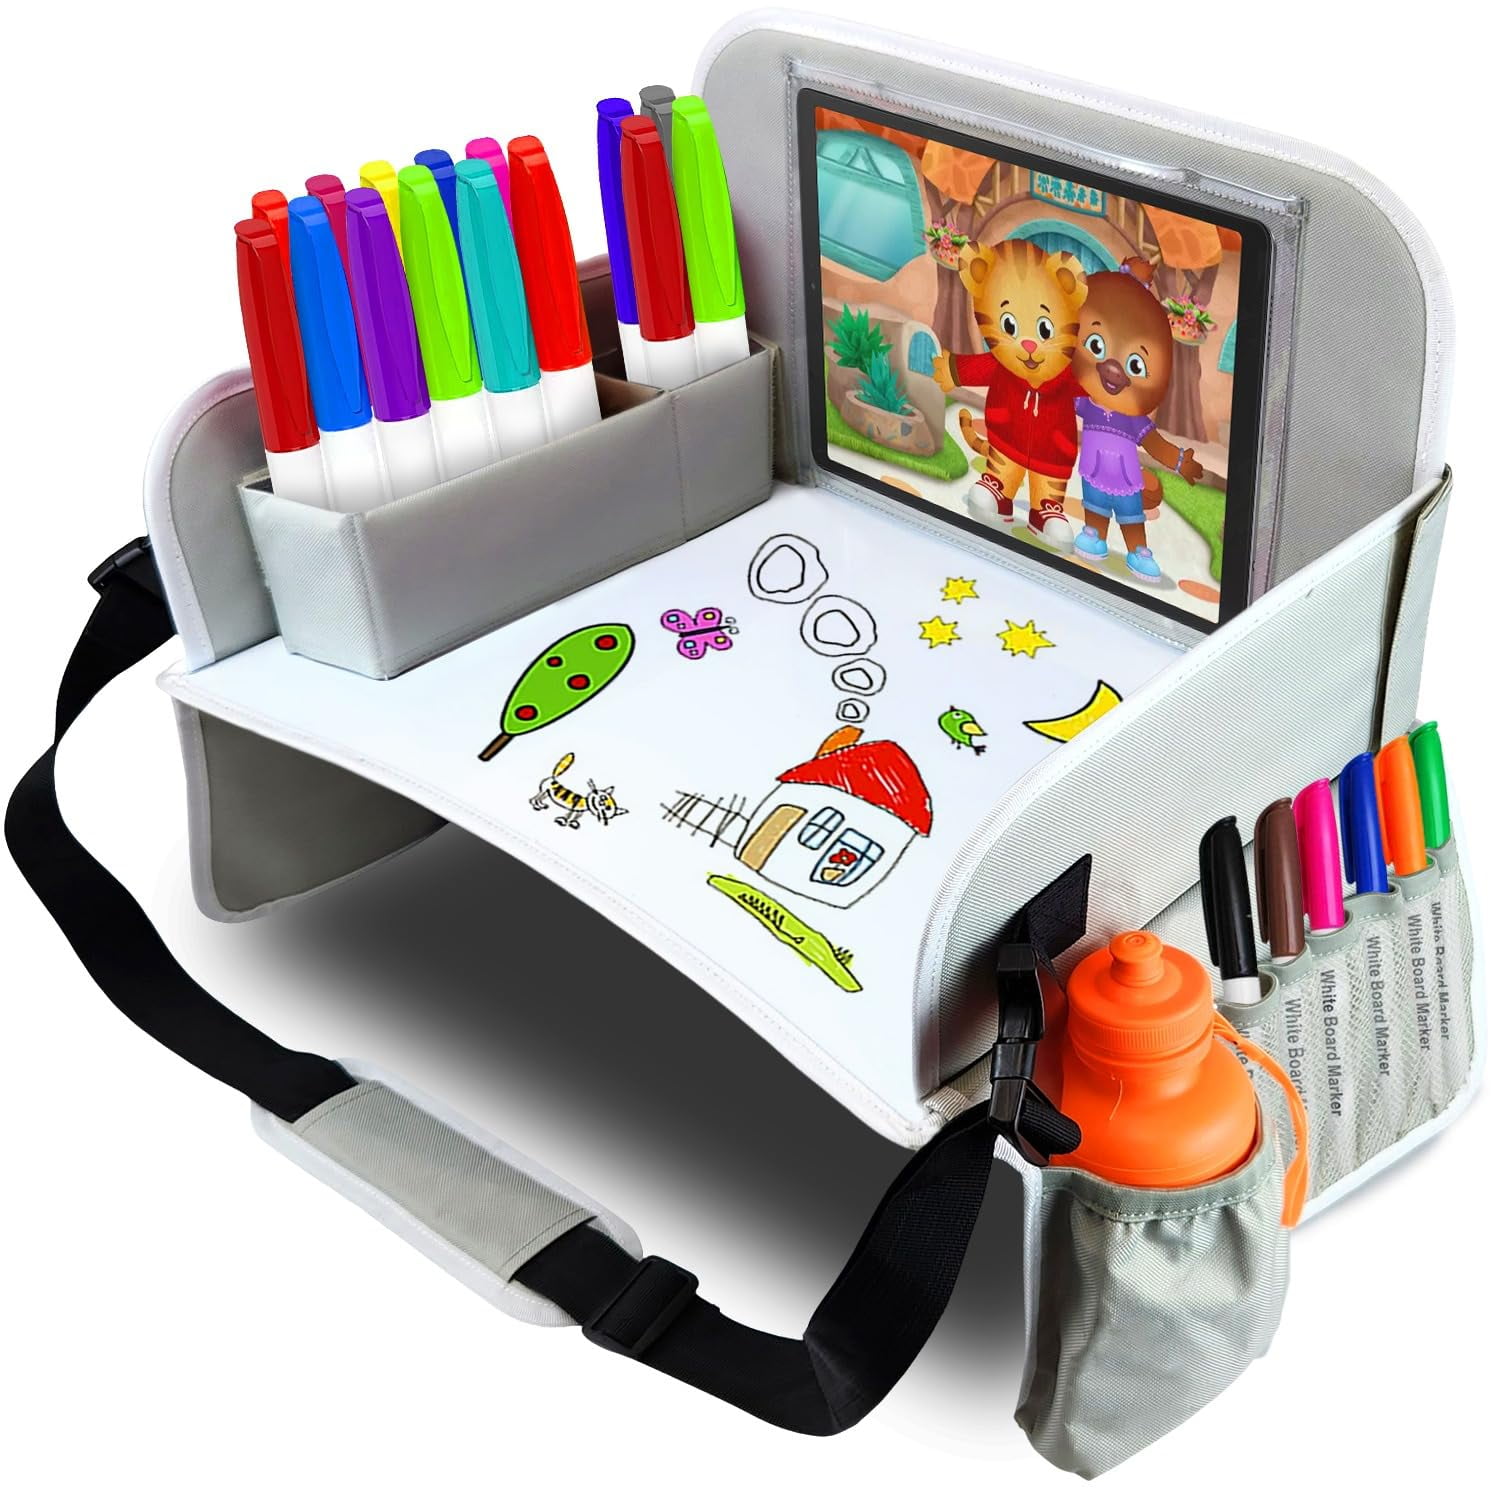 Auto Drive Black Travel Lap Desk for Kids, 13.31 Length, 16.53 inch Width x 1.87 inch Height (Universal Fit)